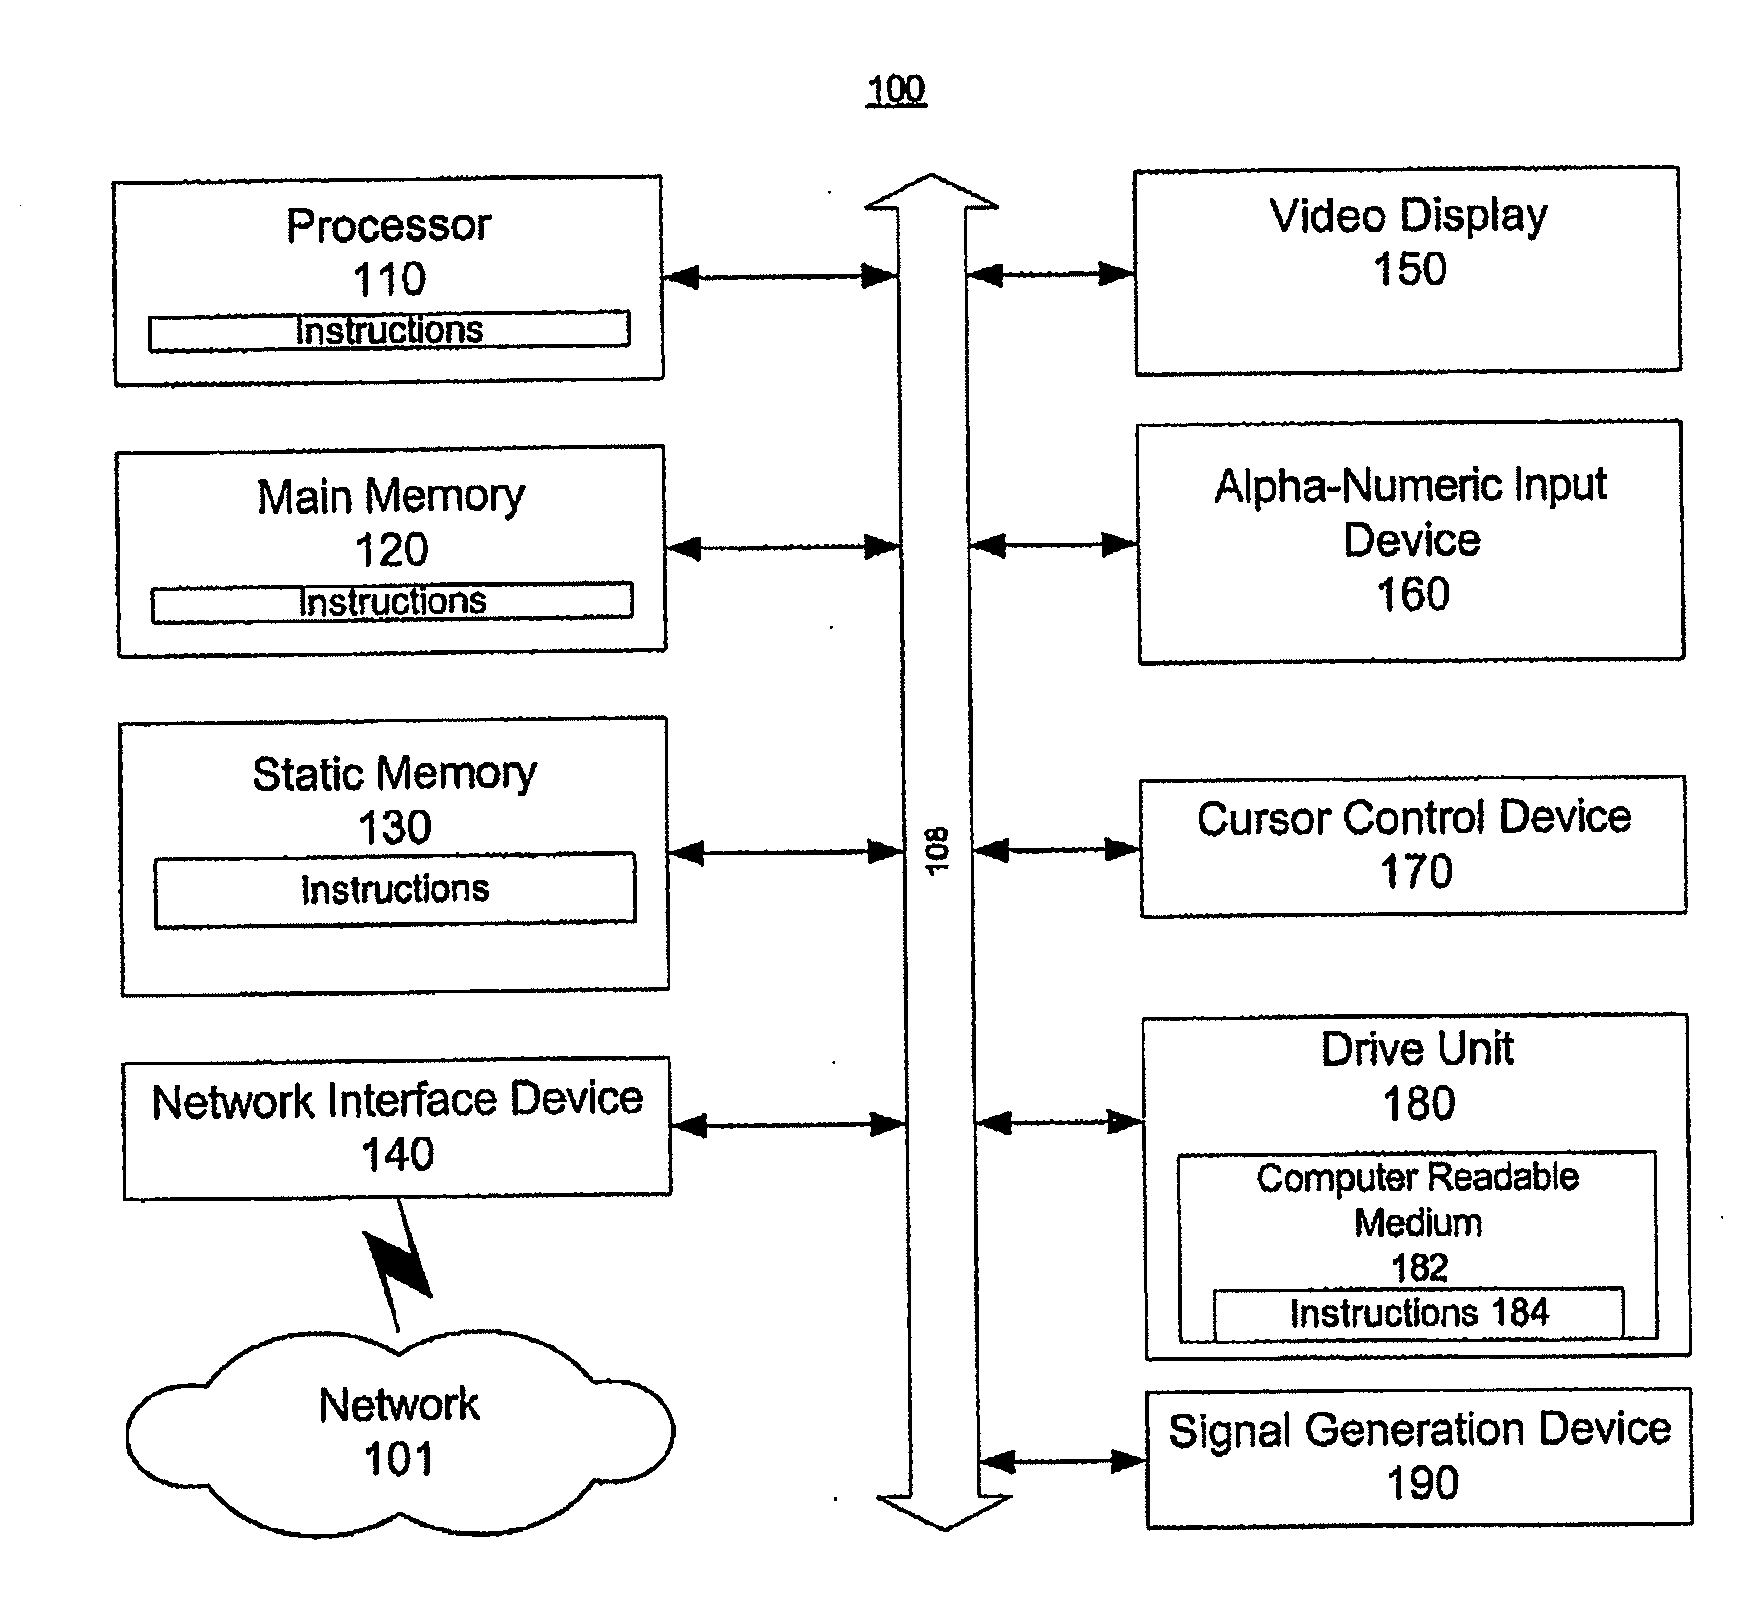 User profile and its location in a clustered profile landscape